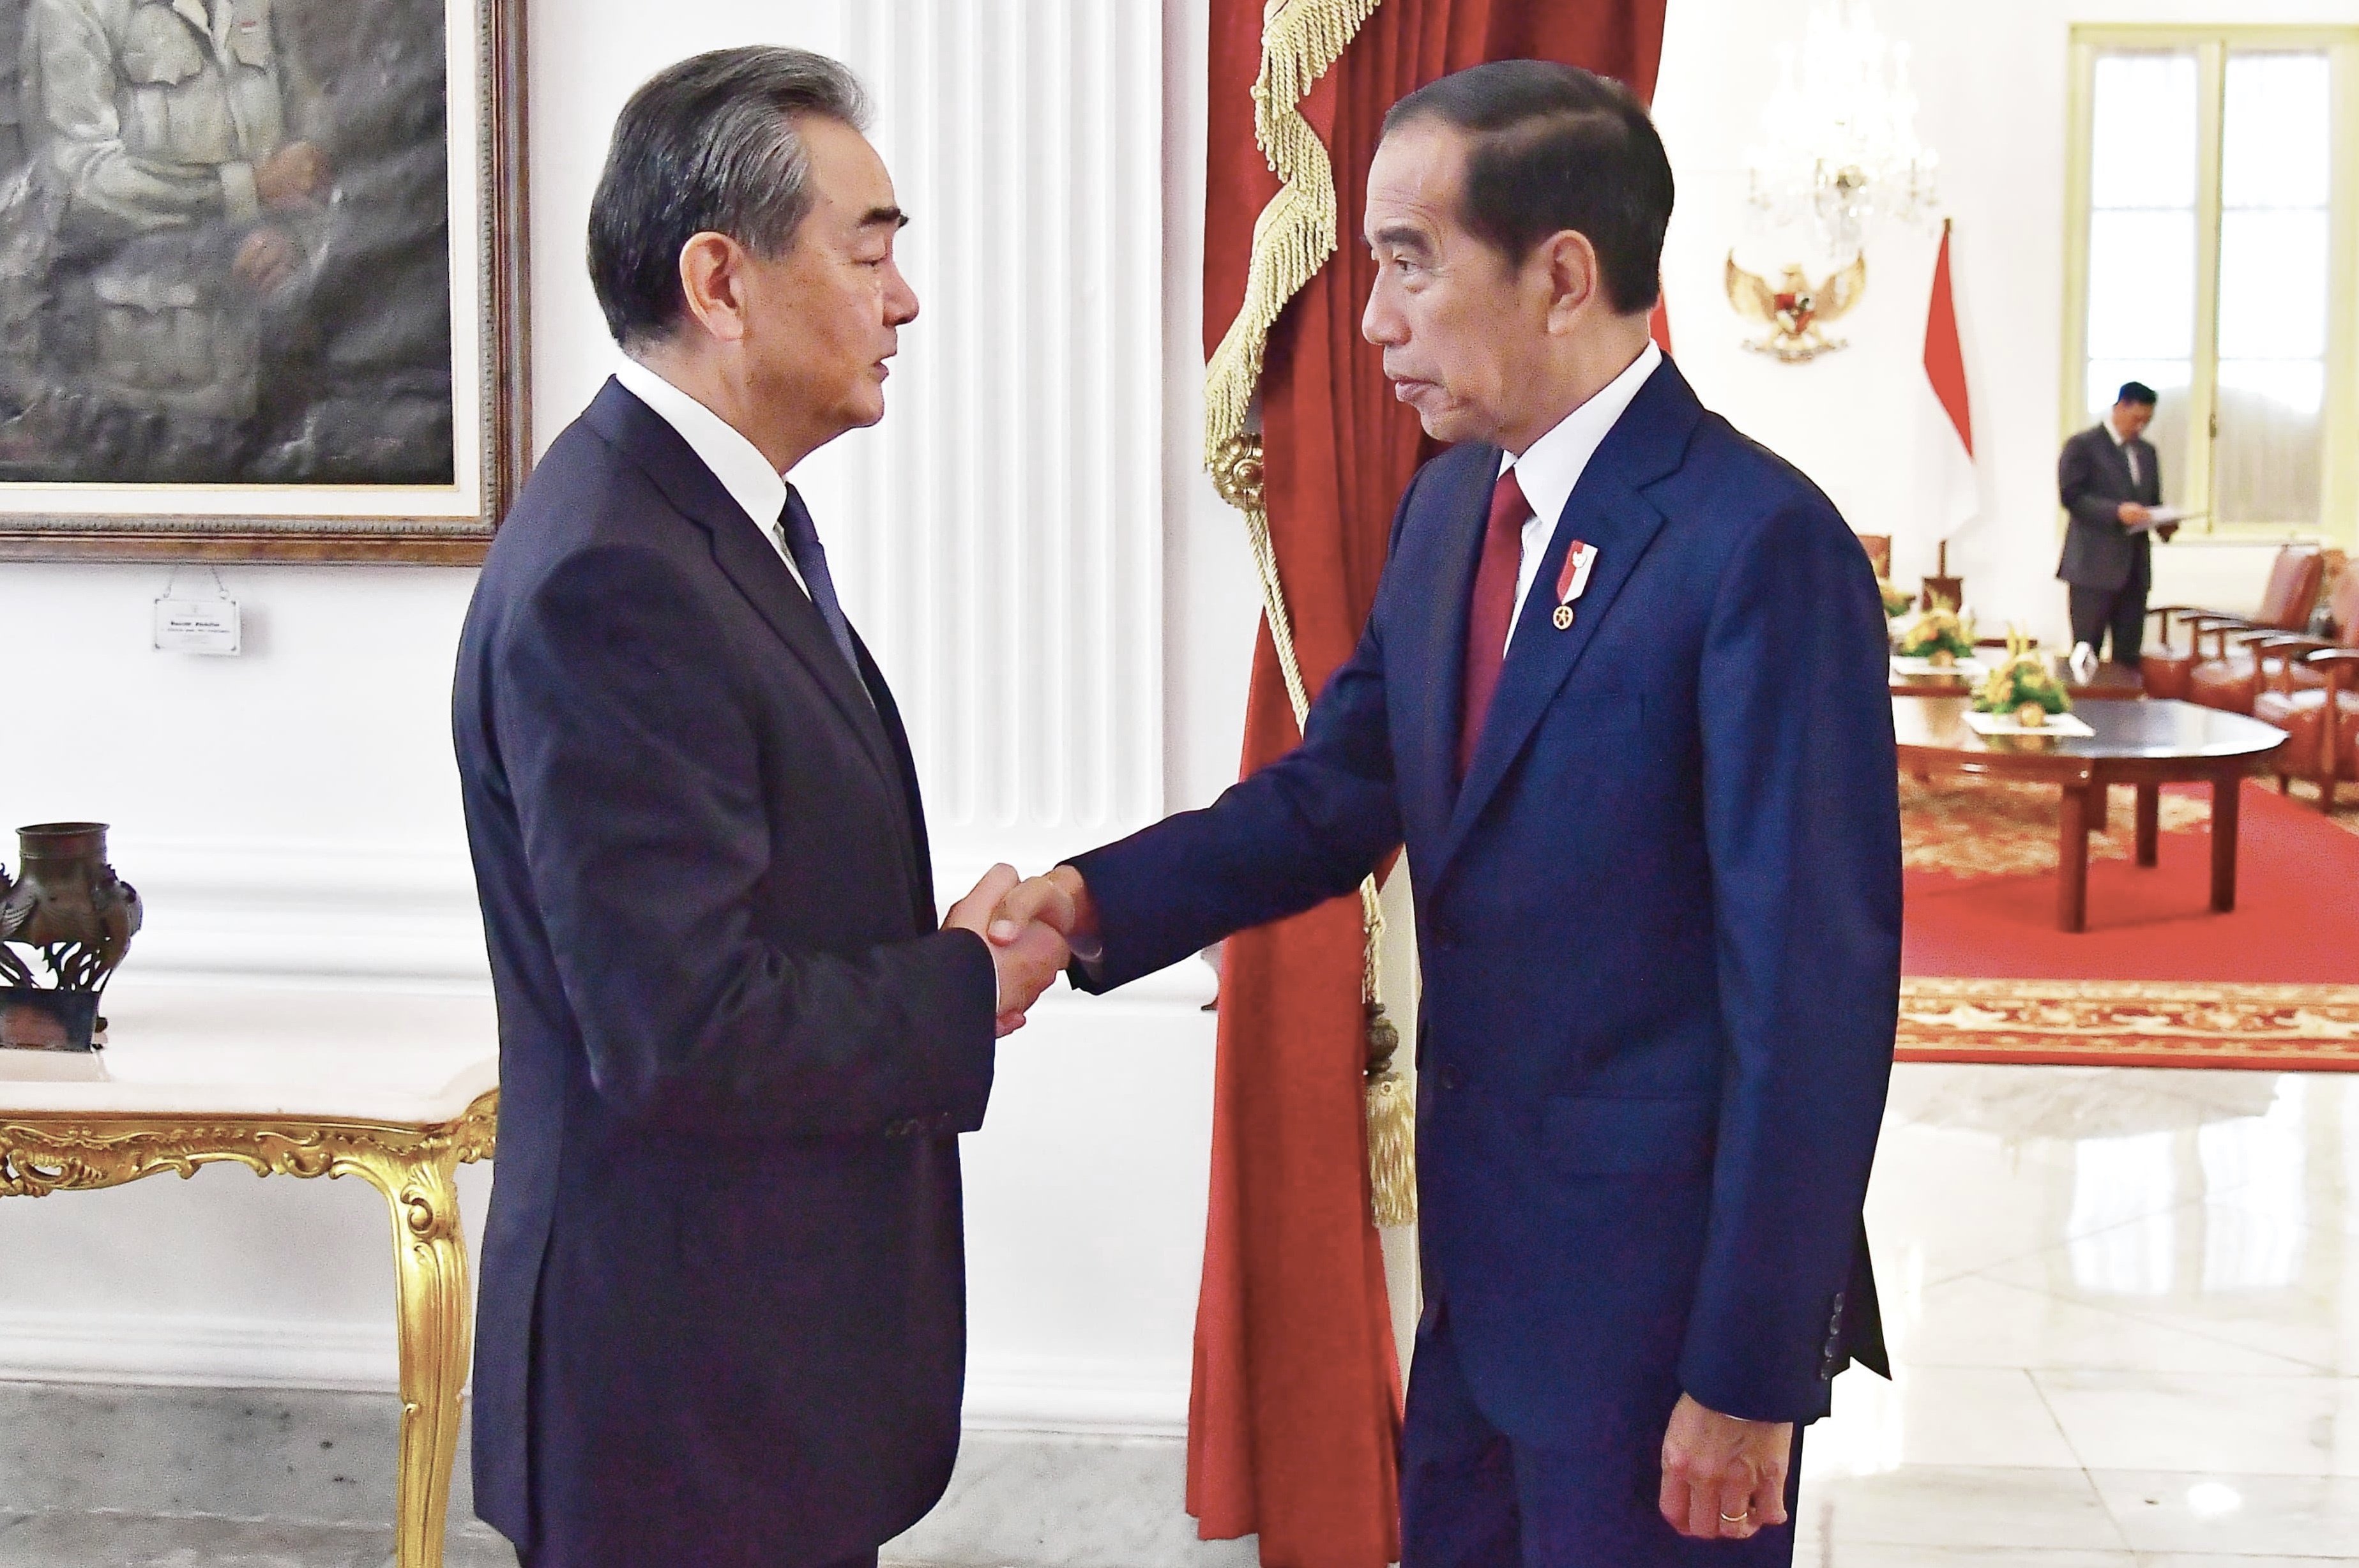 Indonesian President Joko Widodo (right) greets Chinese Foreign Affairs Minister Wang Yi at the palace in Jakarta, Indonesia, on Thursday. Photo: EPA-EFE/Indonesia’s presidential palace